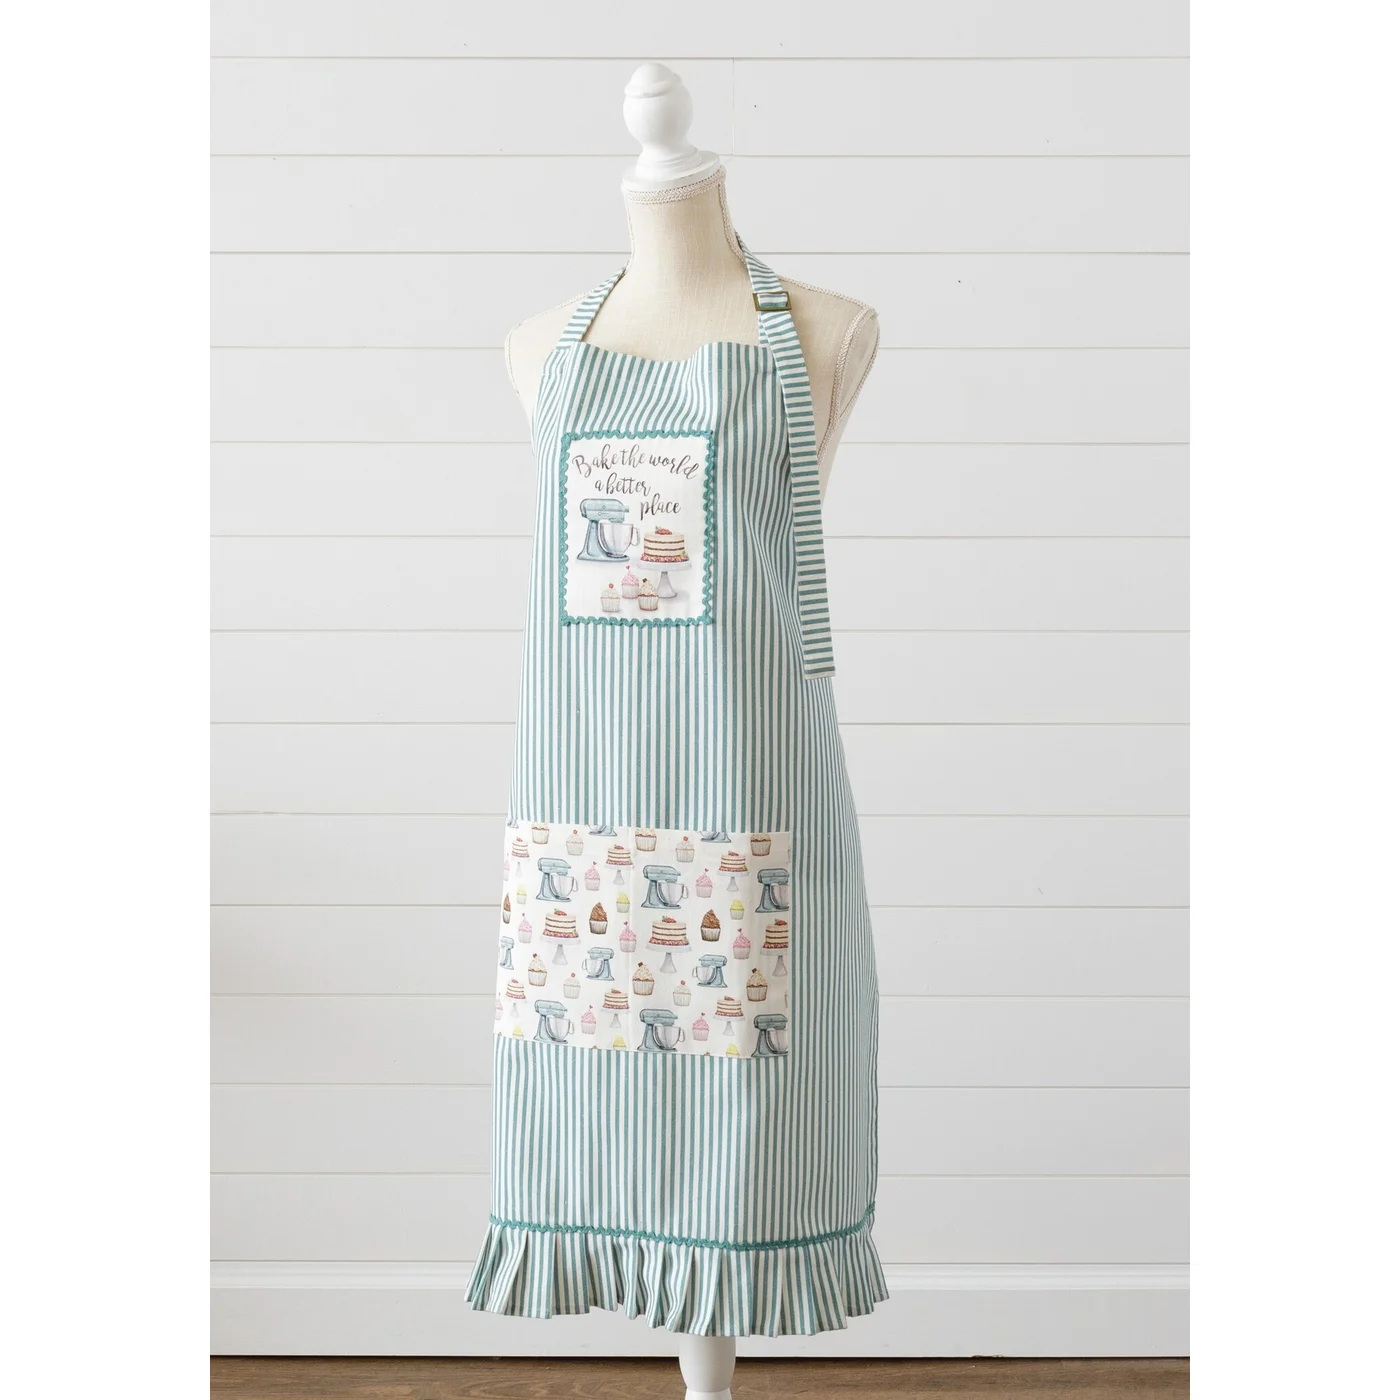 Bake the World a Better Place Full Length Apron